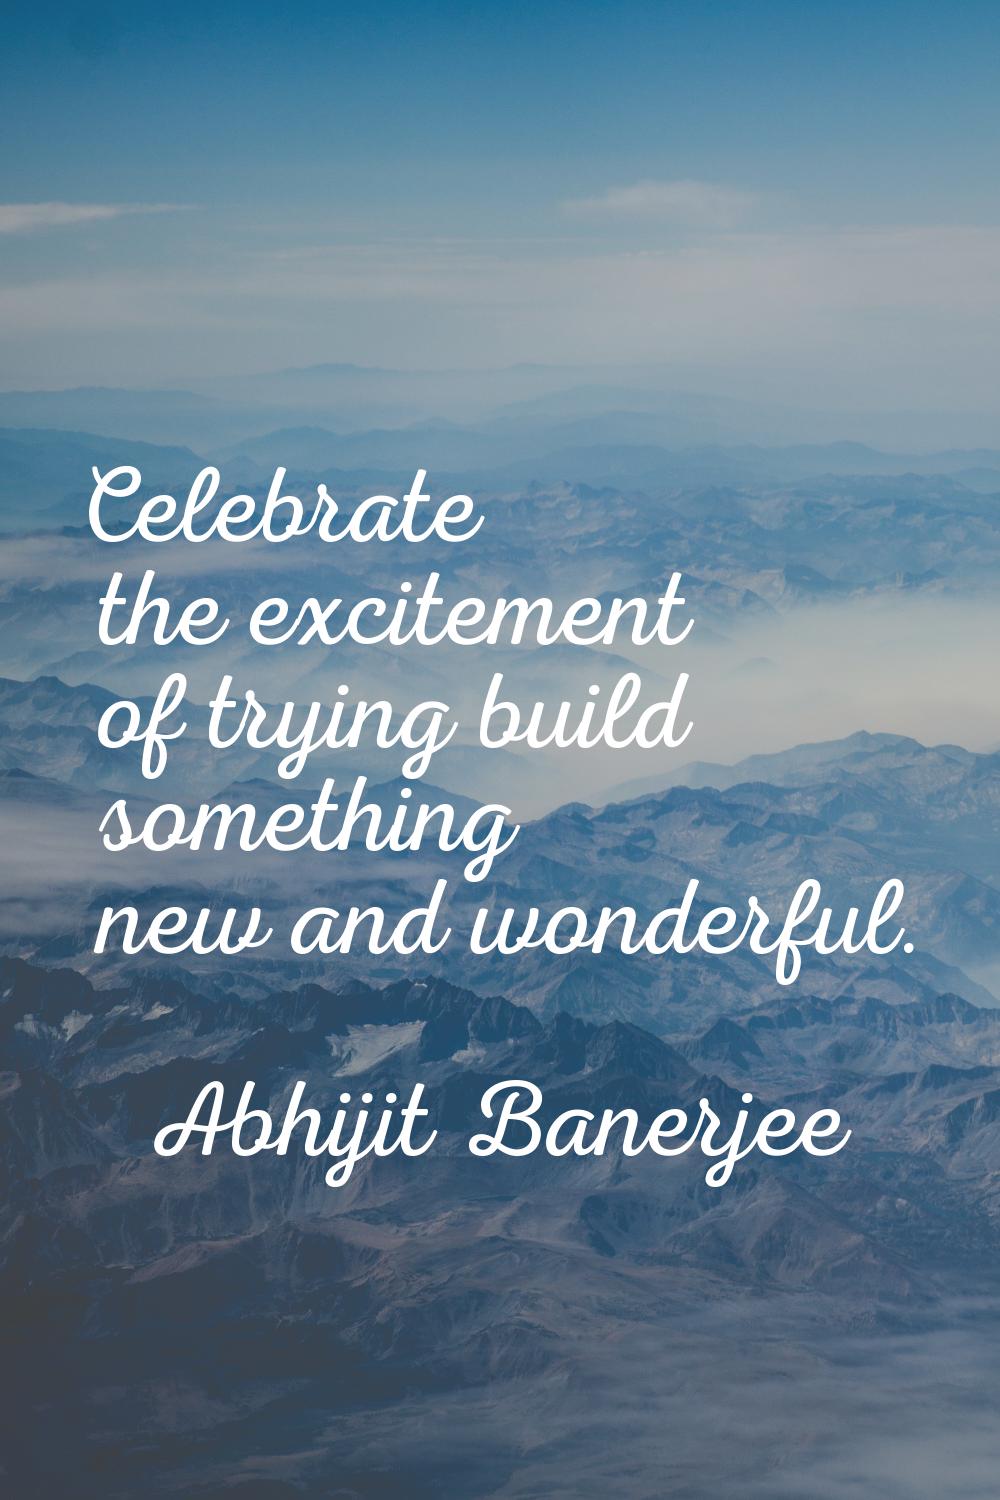 Celebrate the excitement of trying build something new and wonderful.